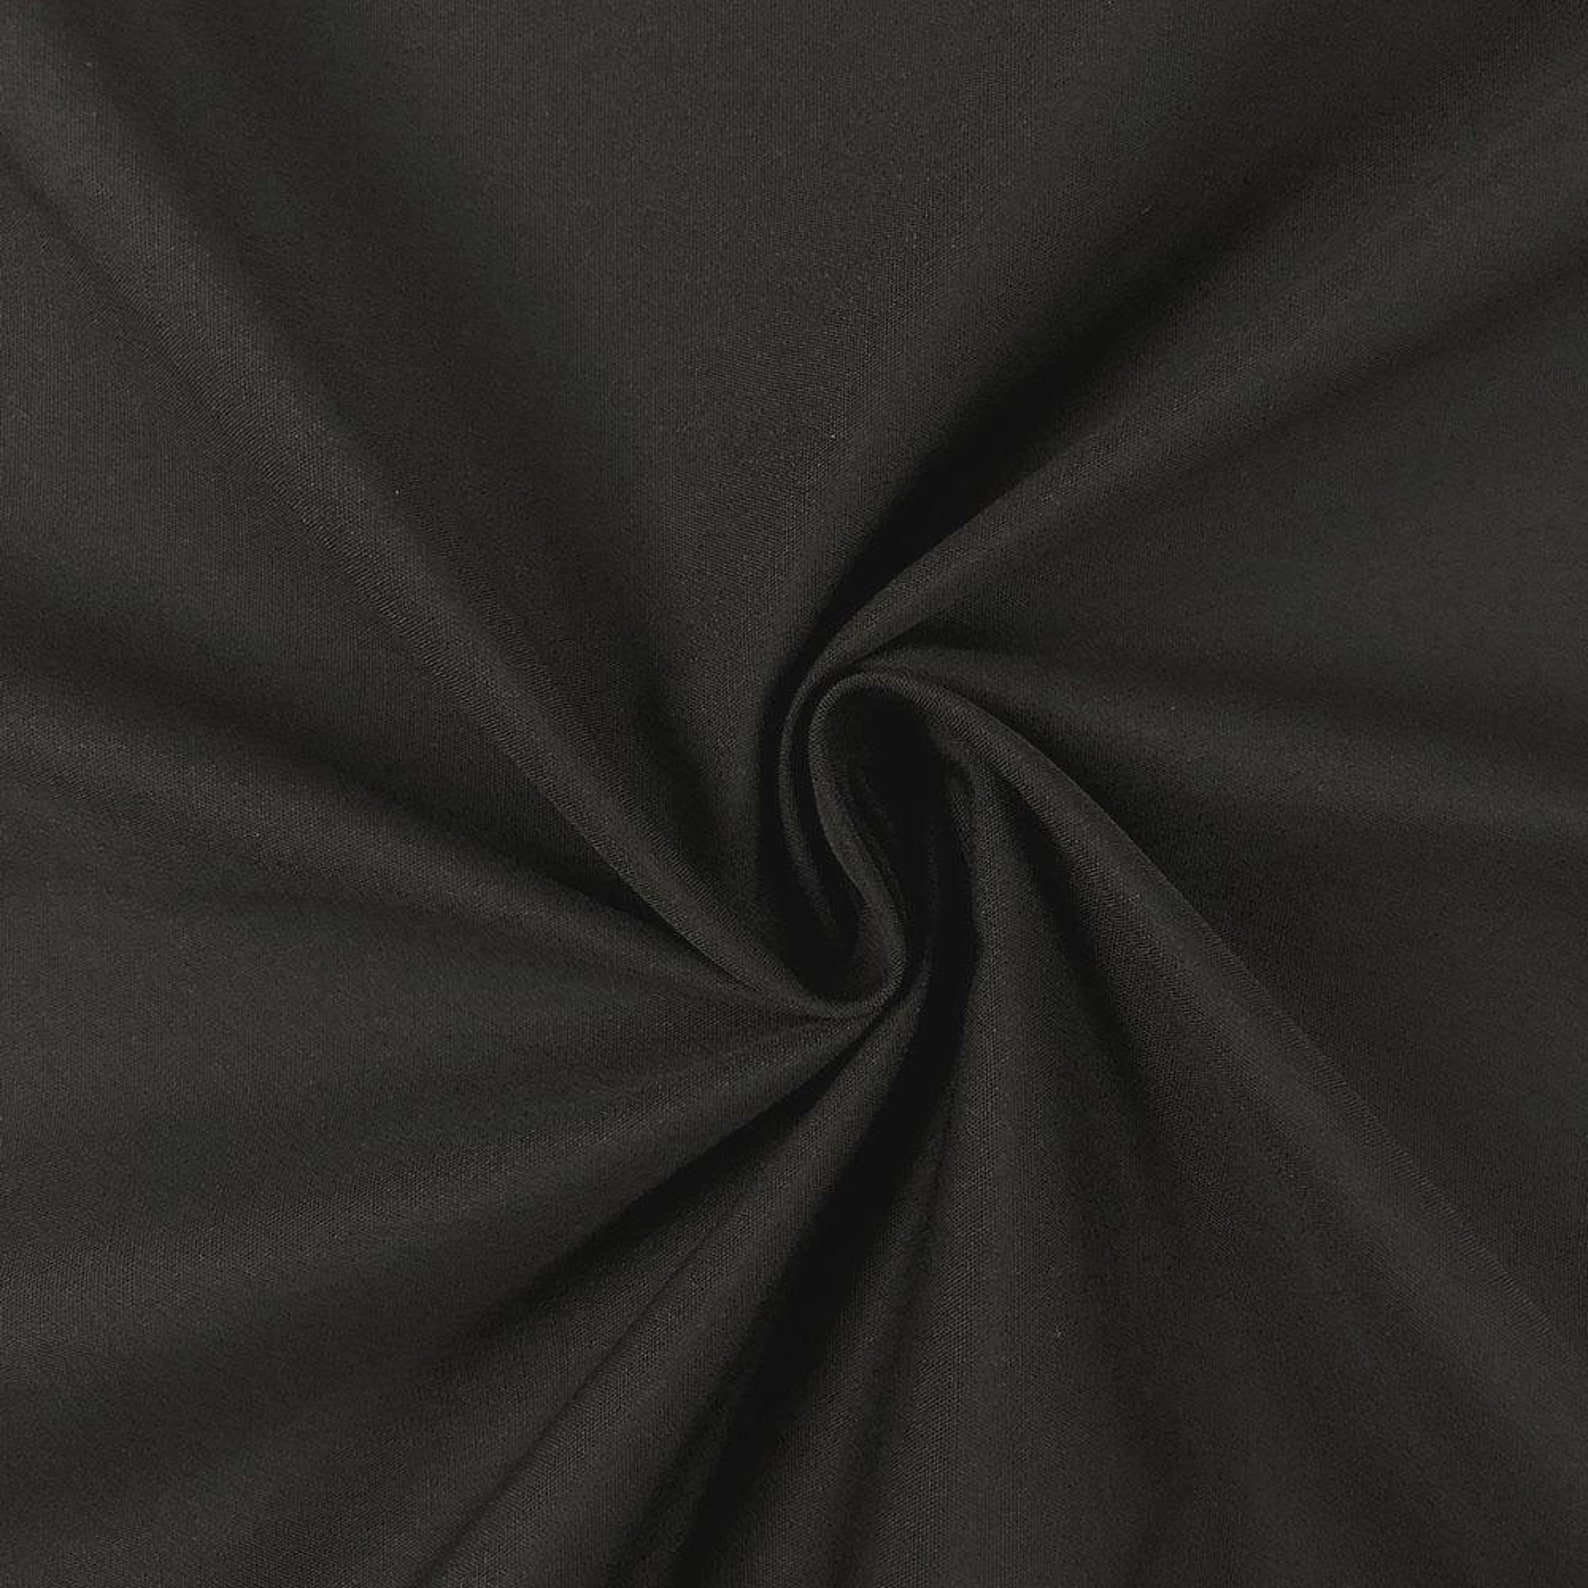 Black 45 Percent Cotton / 55% Polyester Broadcloth Fabric | Etsy 55 Percent Cotton 45 Percent Polyester